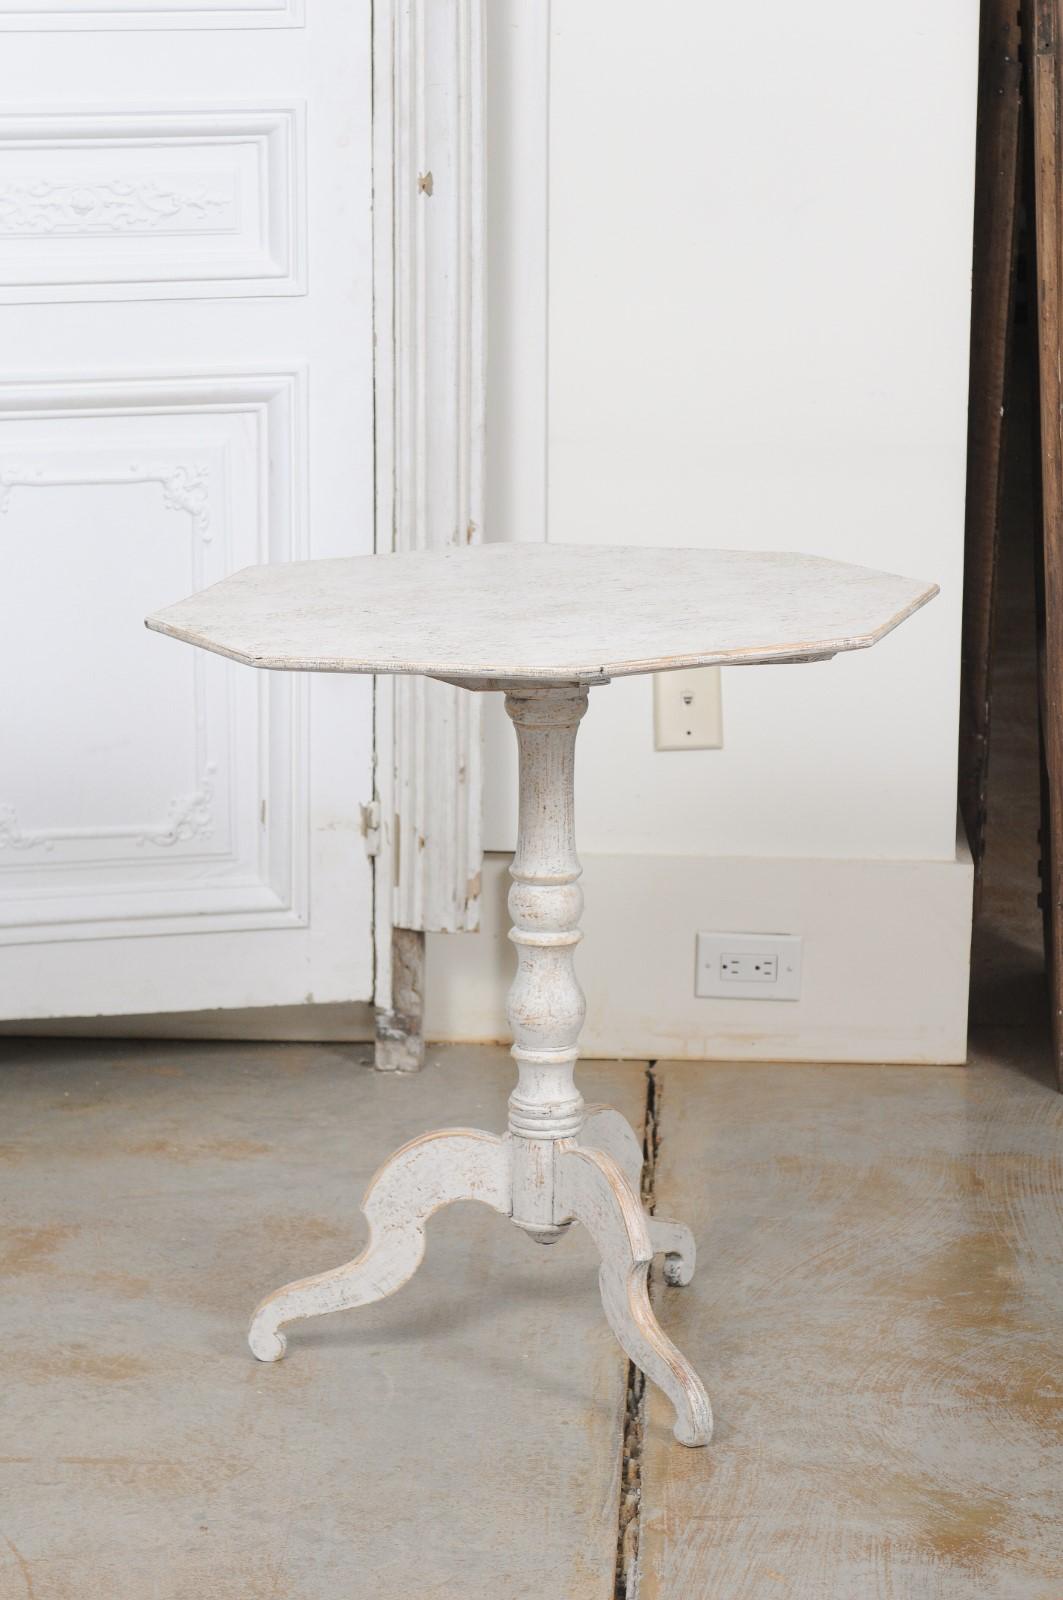 A Swedish painted wood octagonal tilt-top table from the mid-19th century, with turned pedestal base. Created in Sweden during the first half of the 19th century, this painted table features an octagonal tilt-top resting upon a turned pedestal with